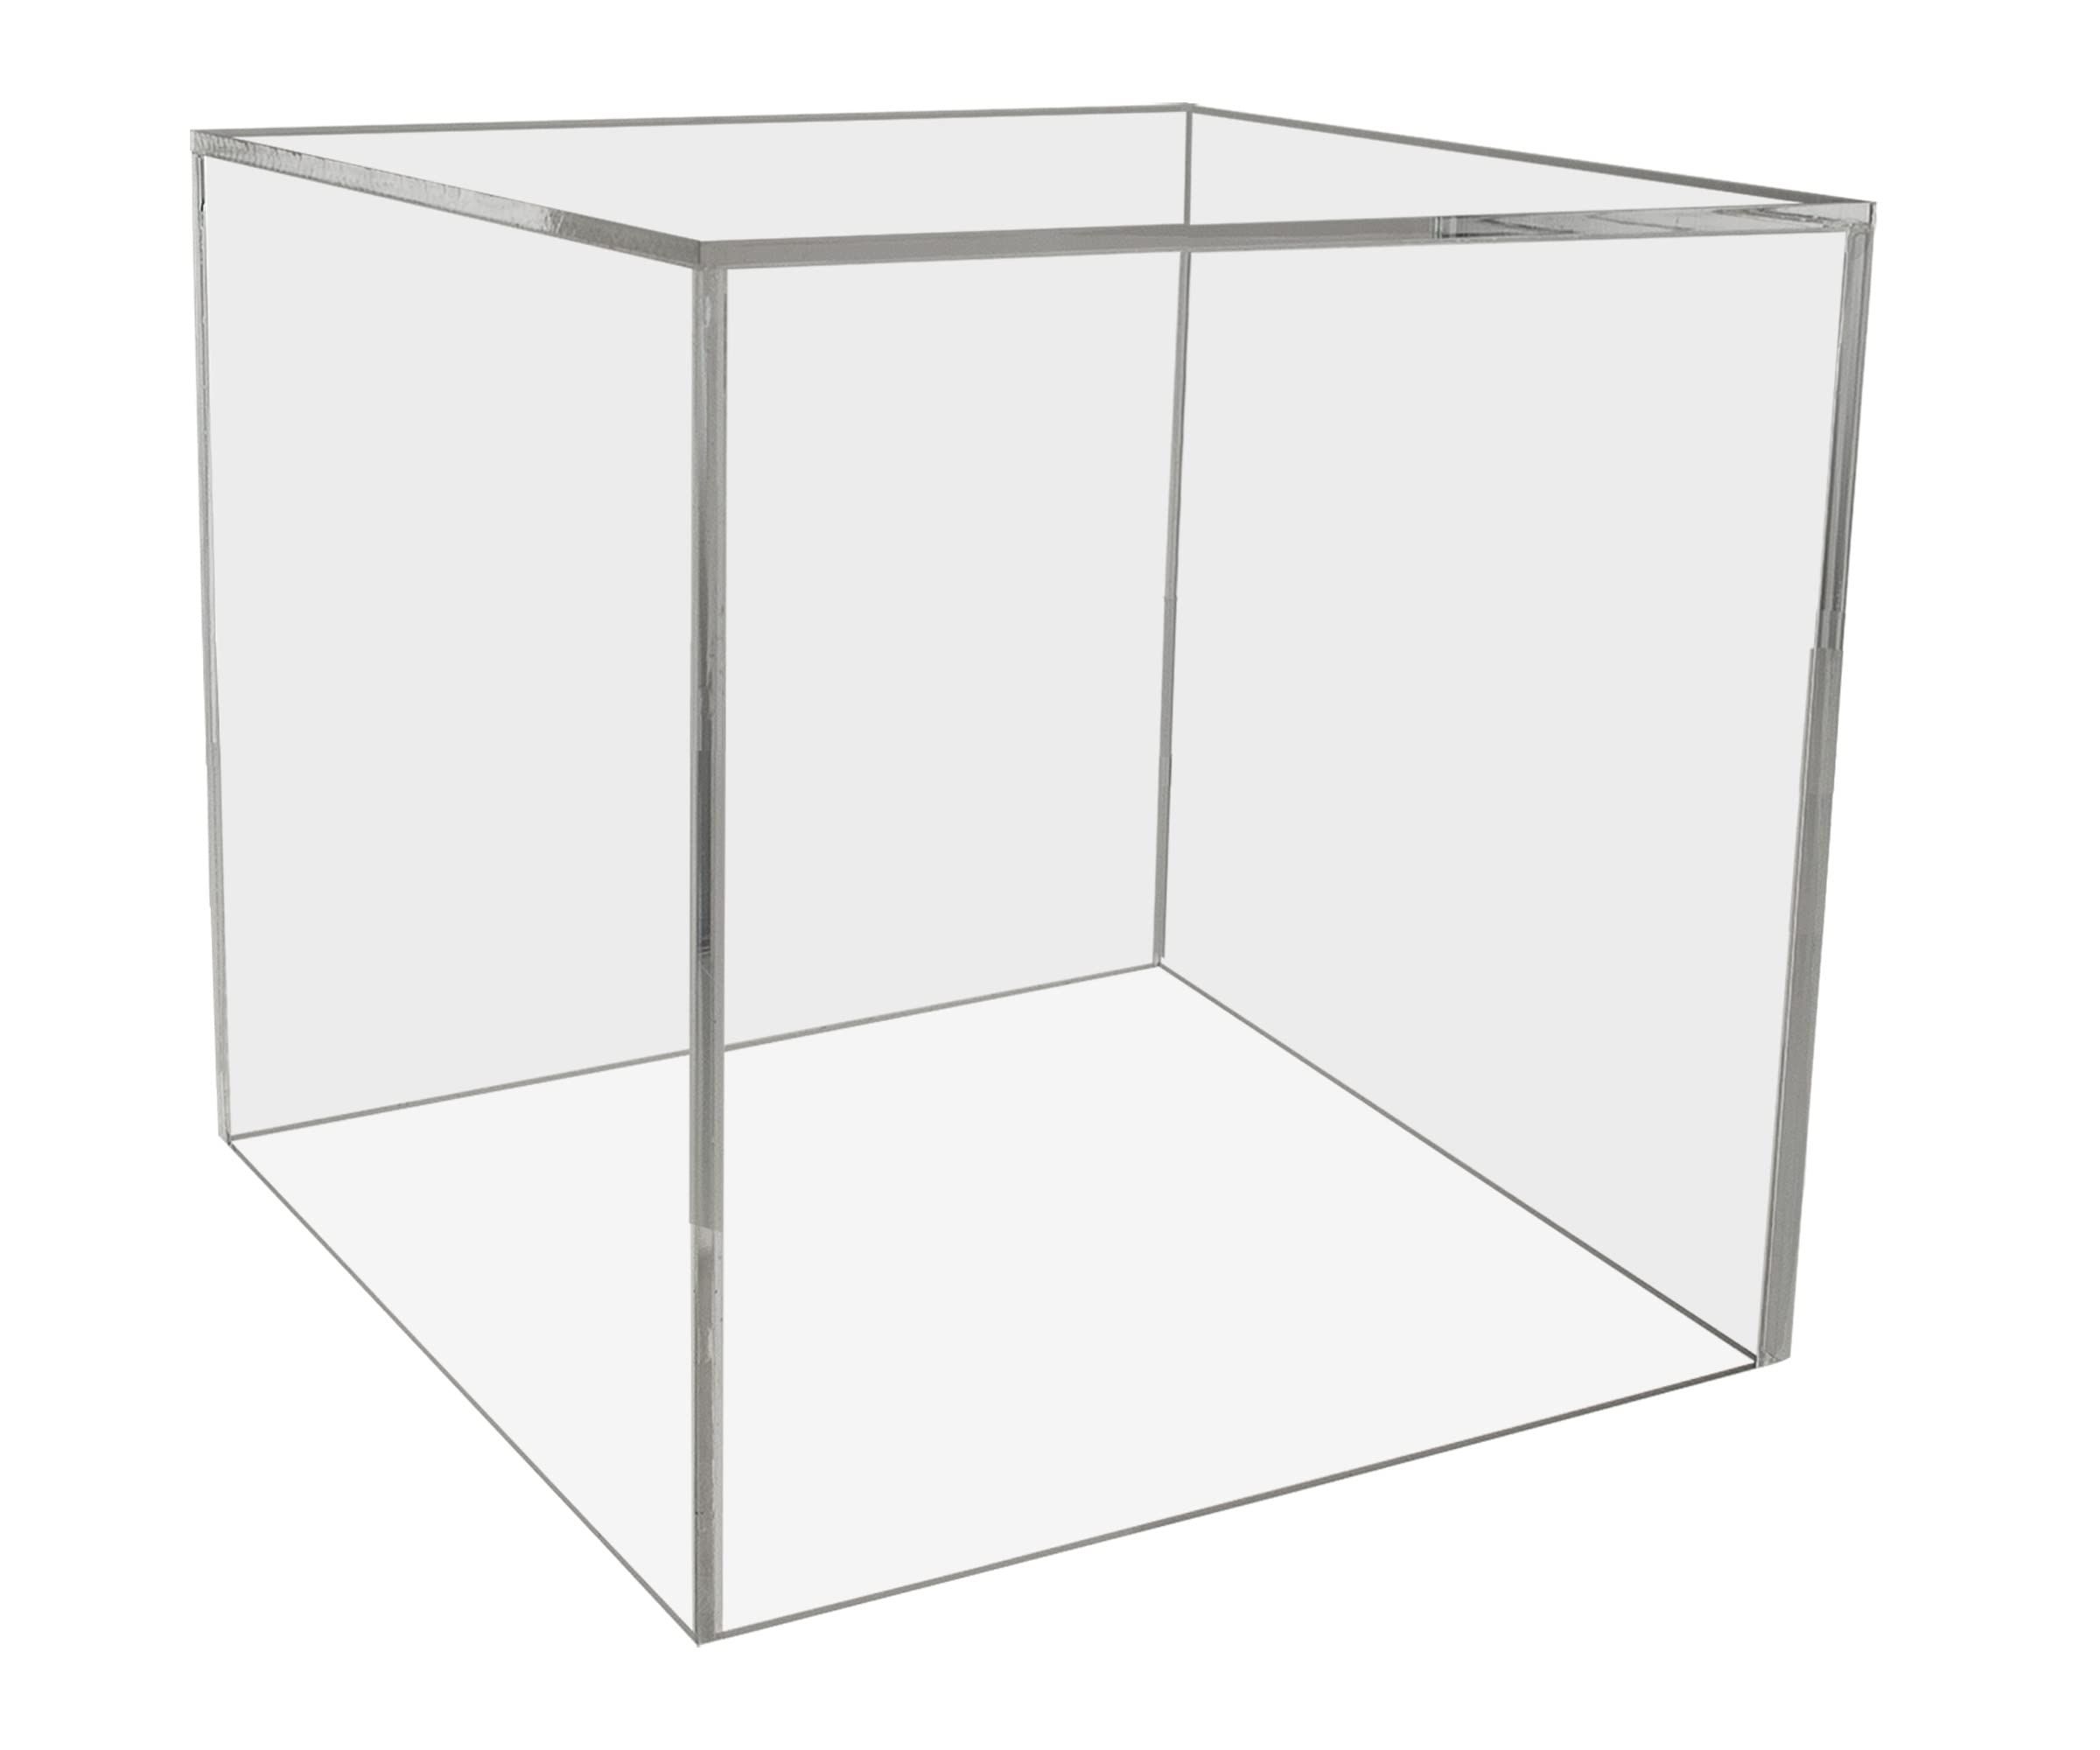 Acrylic Plant Stands For Preferred Marketing Holders Acrylic Display Box Square 14" X 14” X 14” Clear Plastic  Bucket Dust Cover Bin Collectibles Elevated Multi Use Showcases Hollow  Square 5 Sided Plant Stand Flippable (View 14 of 15)